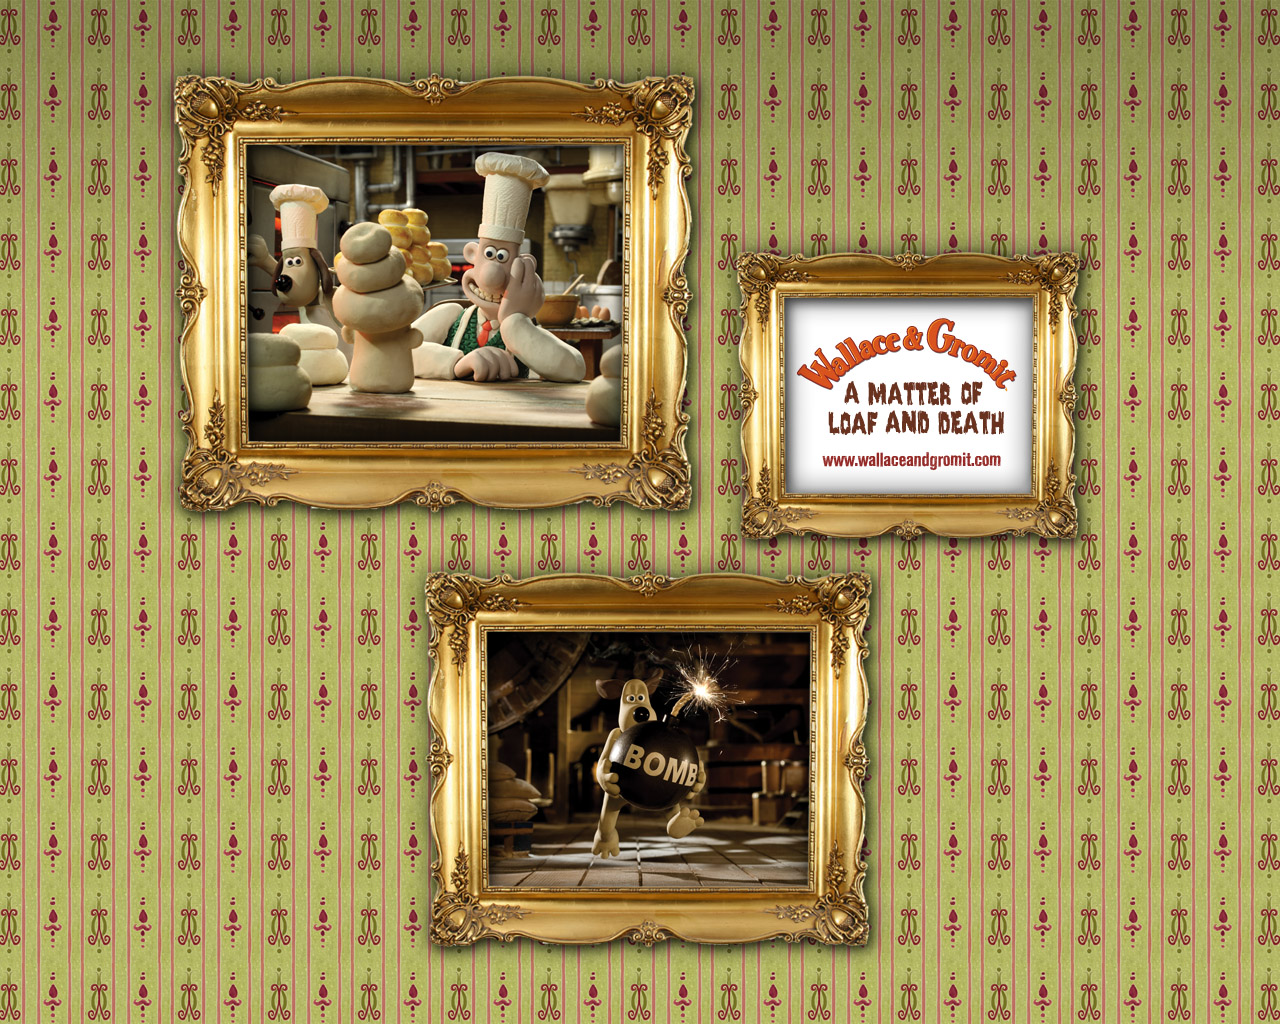 Wallace And Gromit Wallpaper - HD Wallpaper 